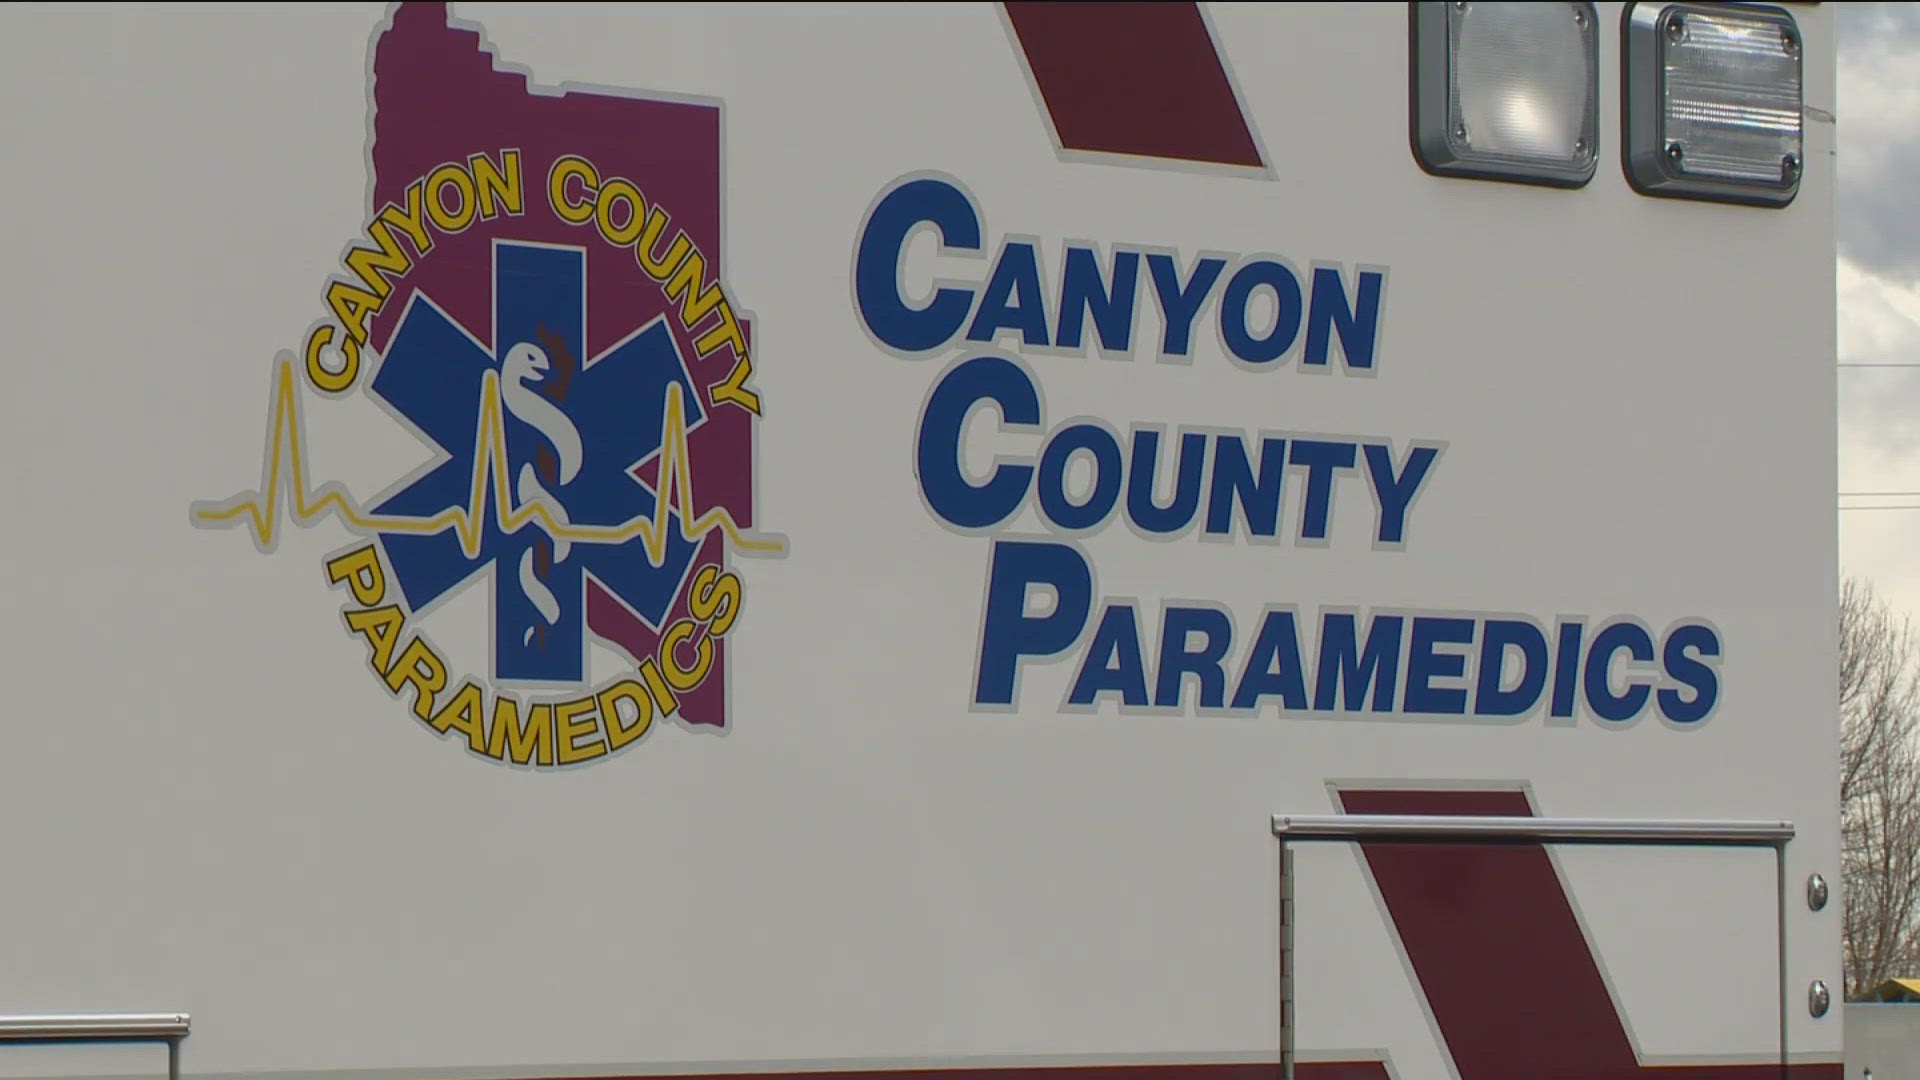 The $8 million levy would have funded 12 new paramedic positions and the addition of two ambulances.